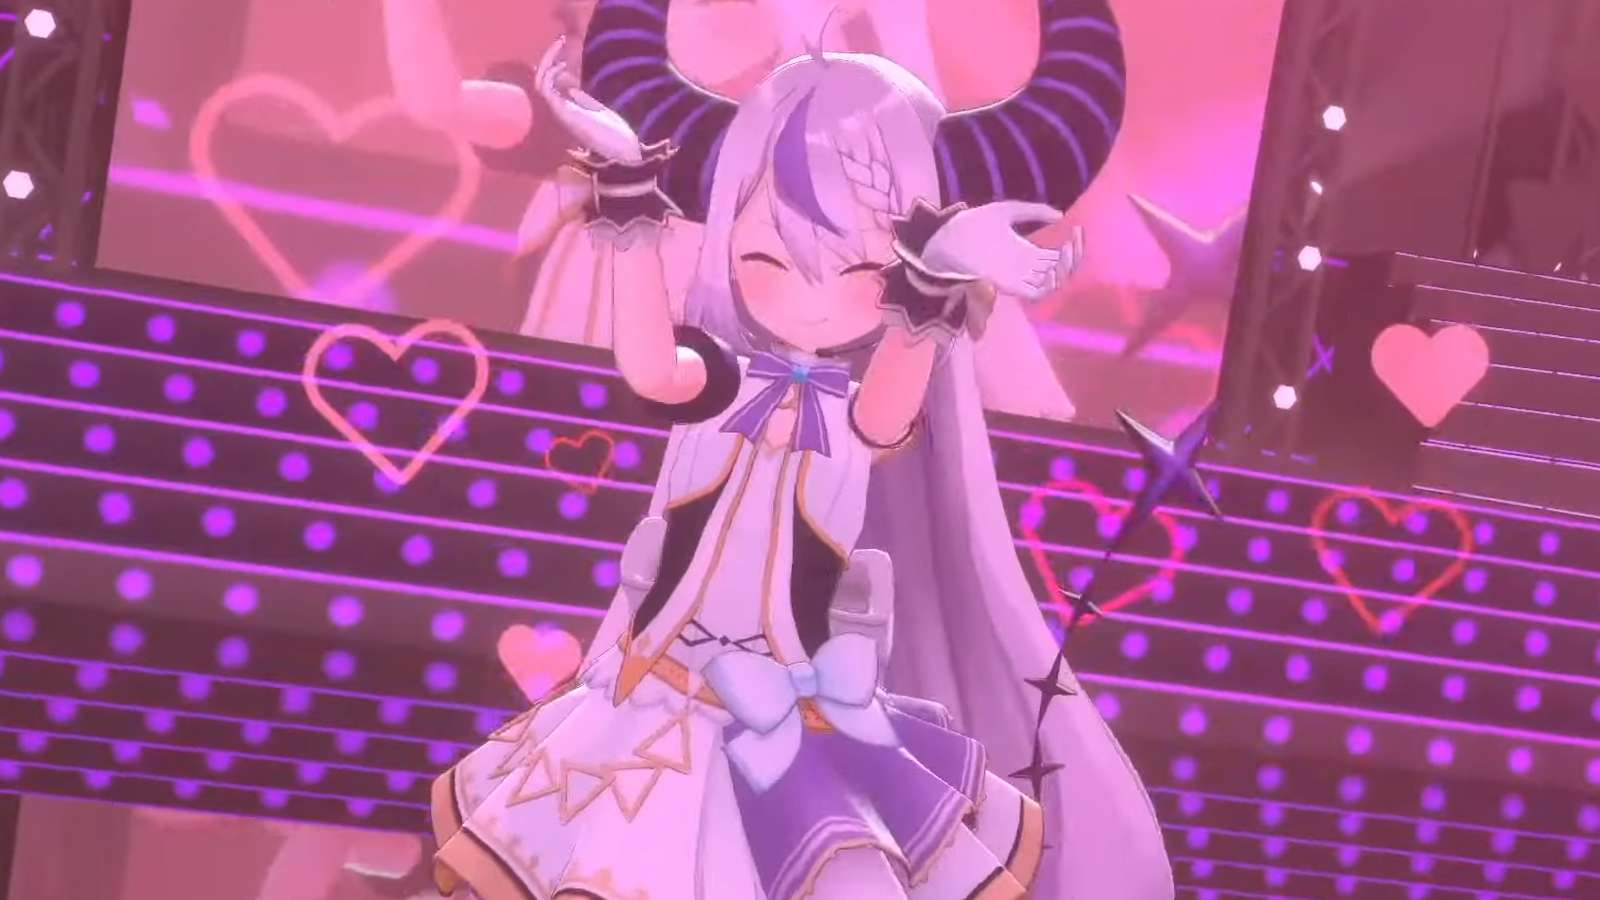 Hololive VTuber Laplus Darkness in idol outfit